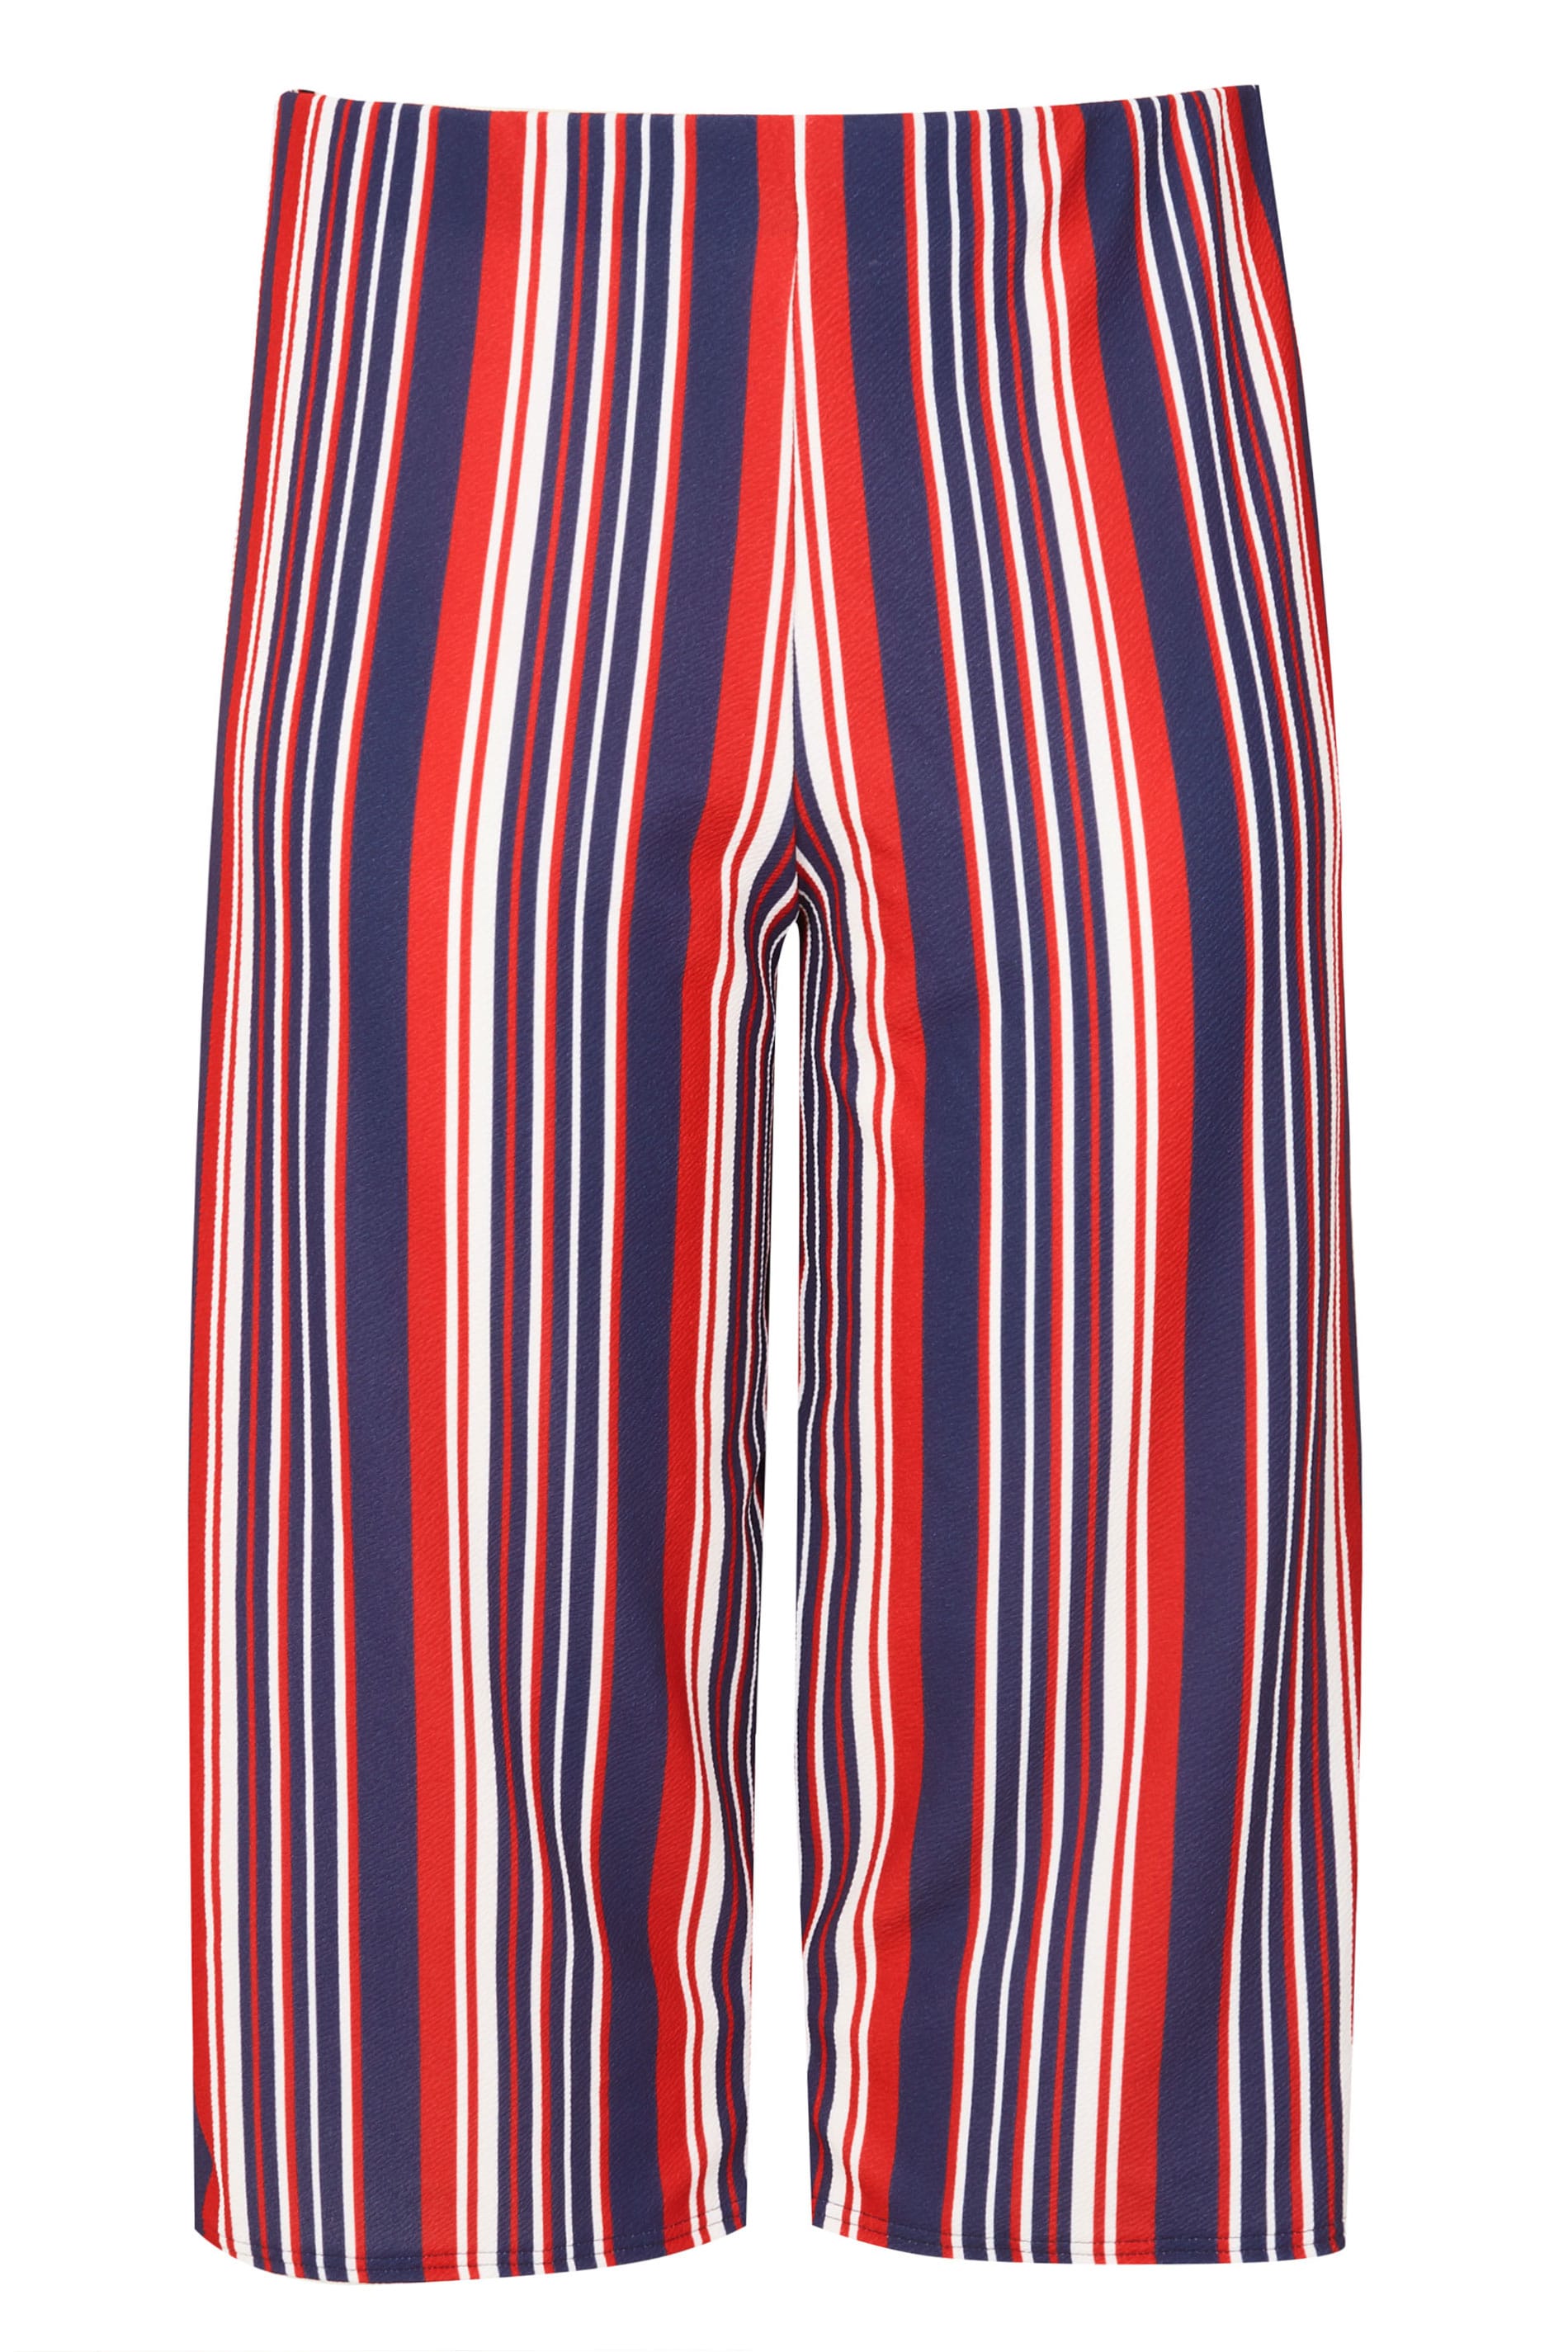 LIMITED COLLECTION Red, White & Navy Striped Culottes, plus size 16 to 32